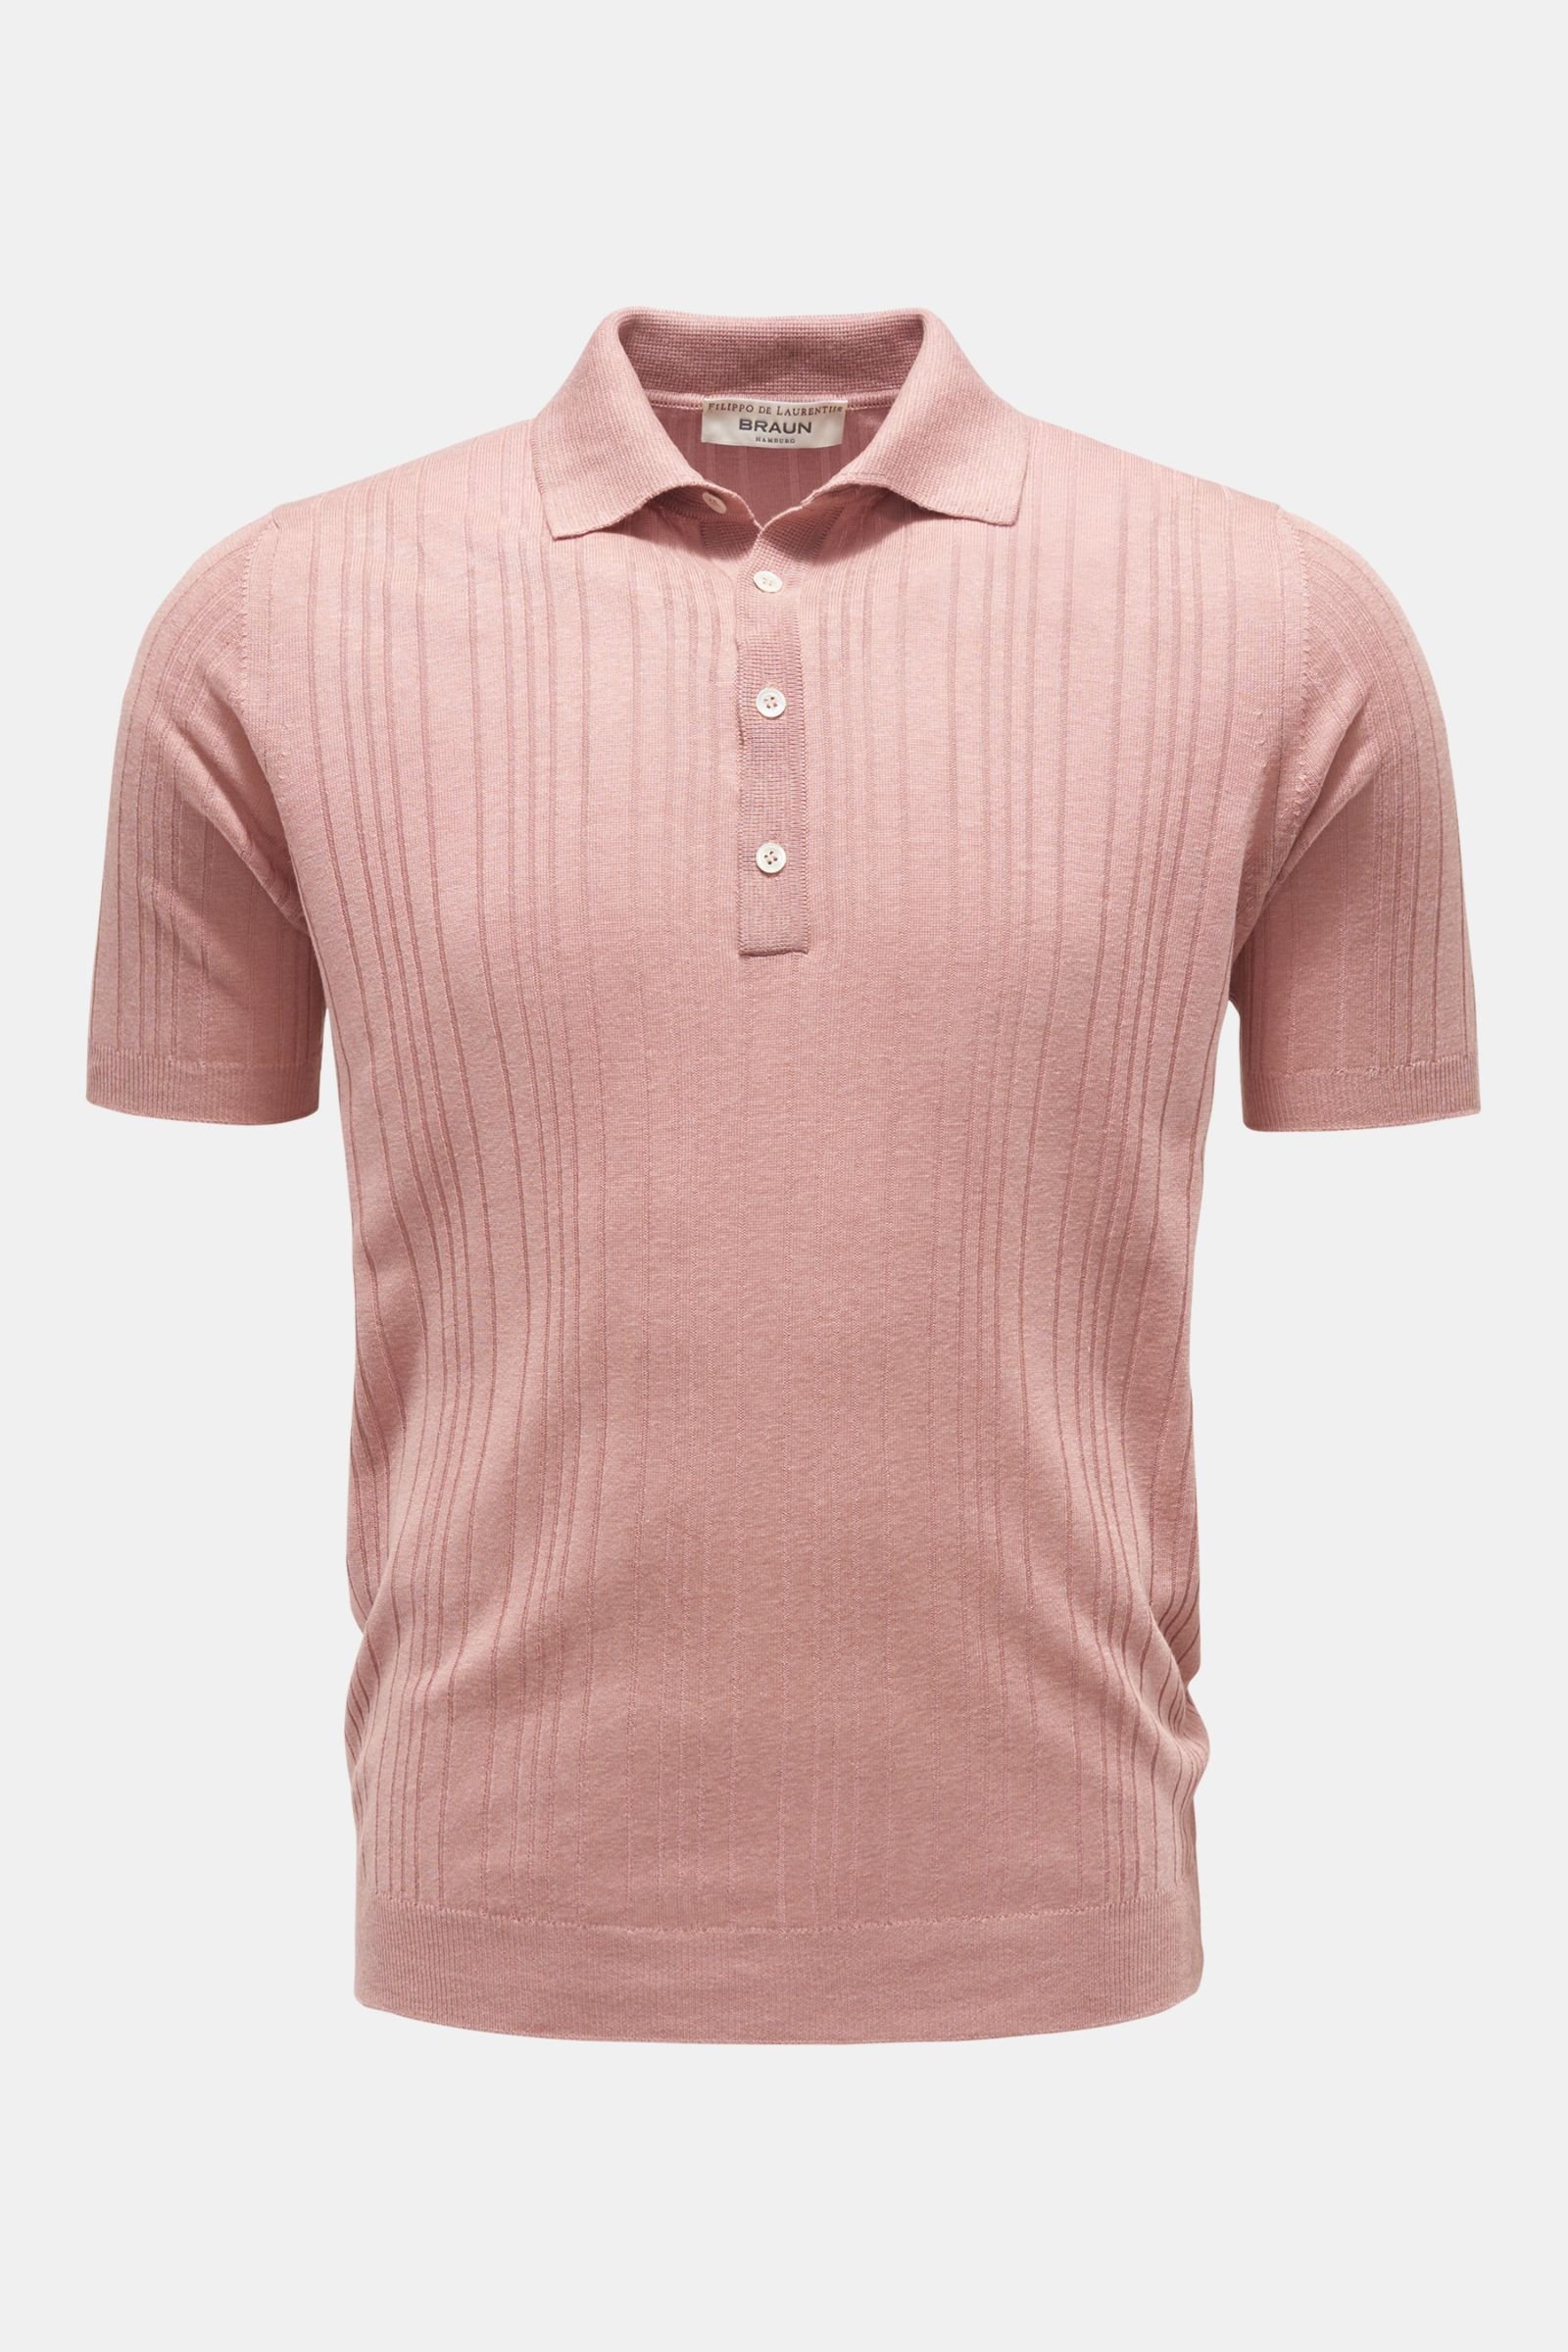 Short sleeve knit polo antique pink